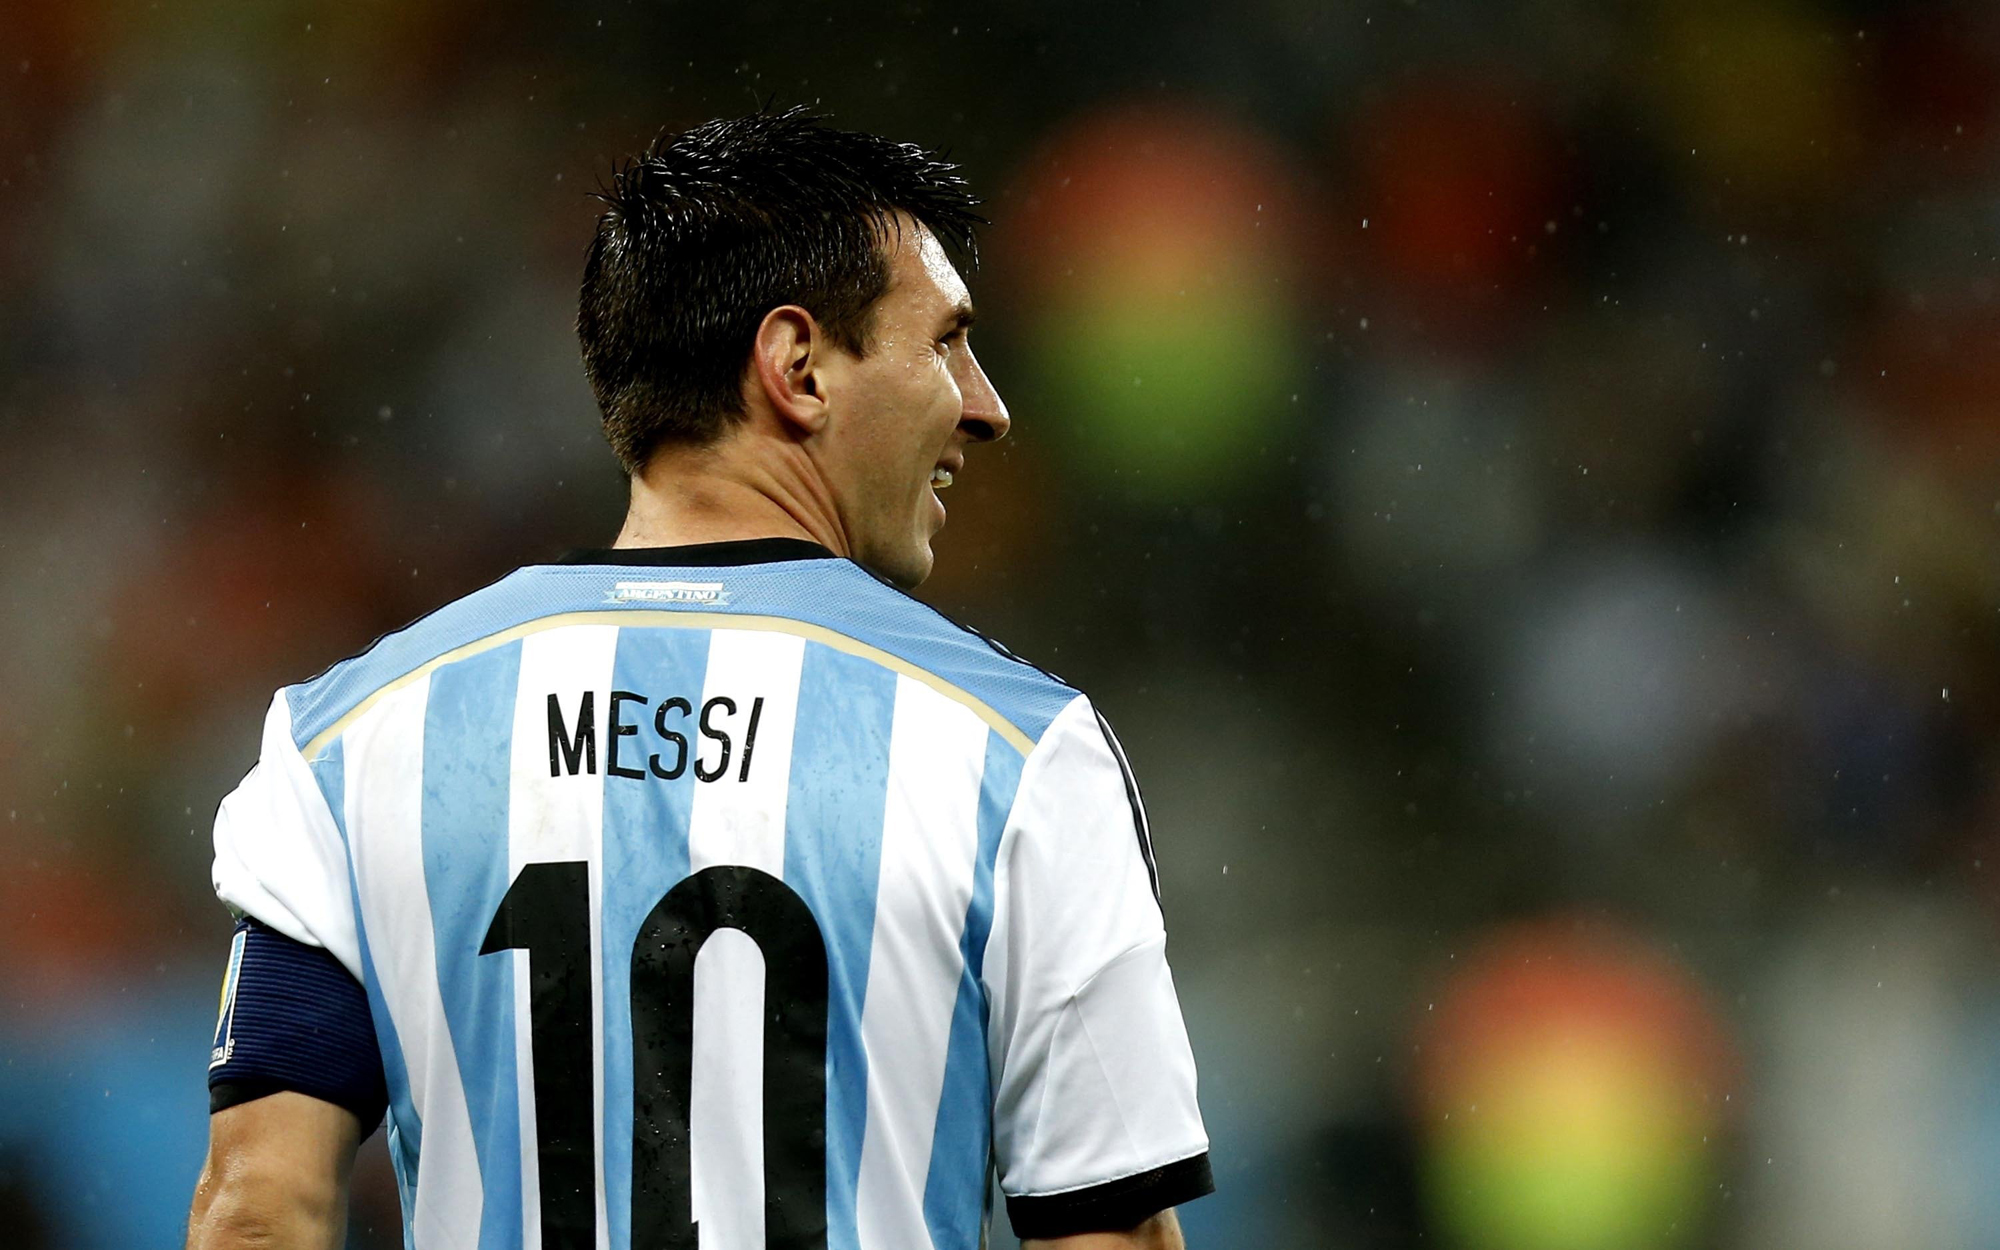 Argentina's Lionel Messi reacts during a semifinal match between Netherlands and Argentina of 2014 FIFA World Cup at the Arena de Sao Paulo Stadium in Sao Paulo, Brazil, on July 9, 2014.